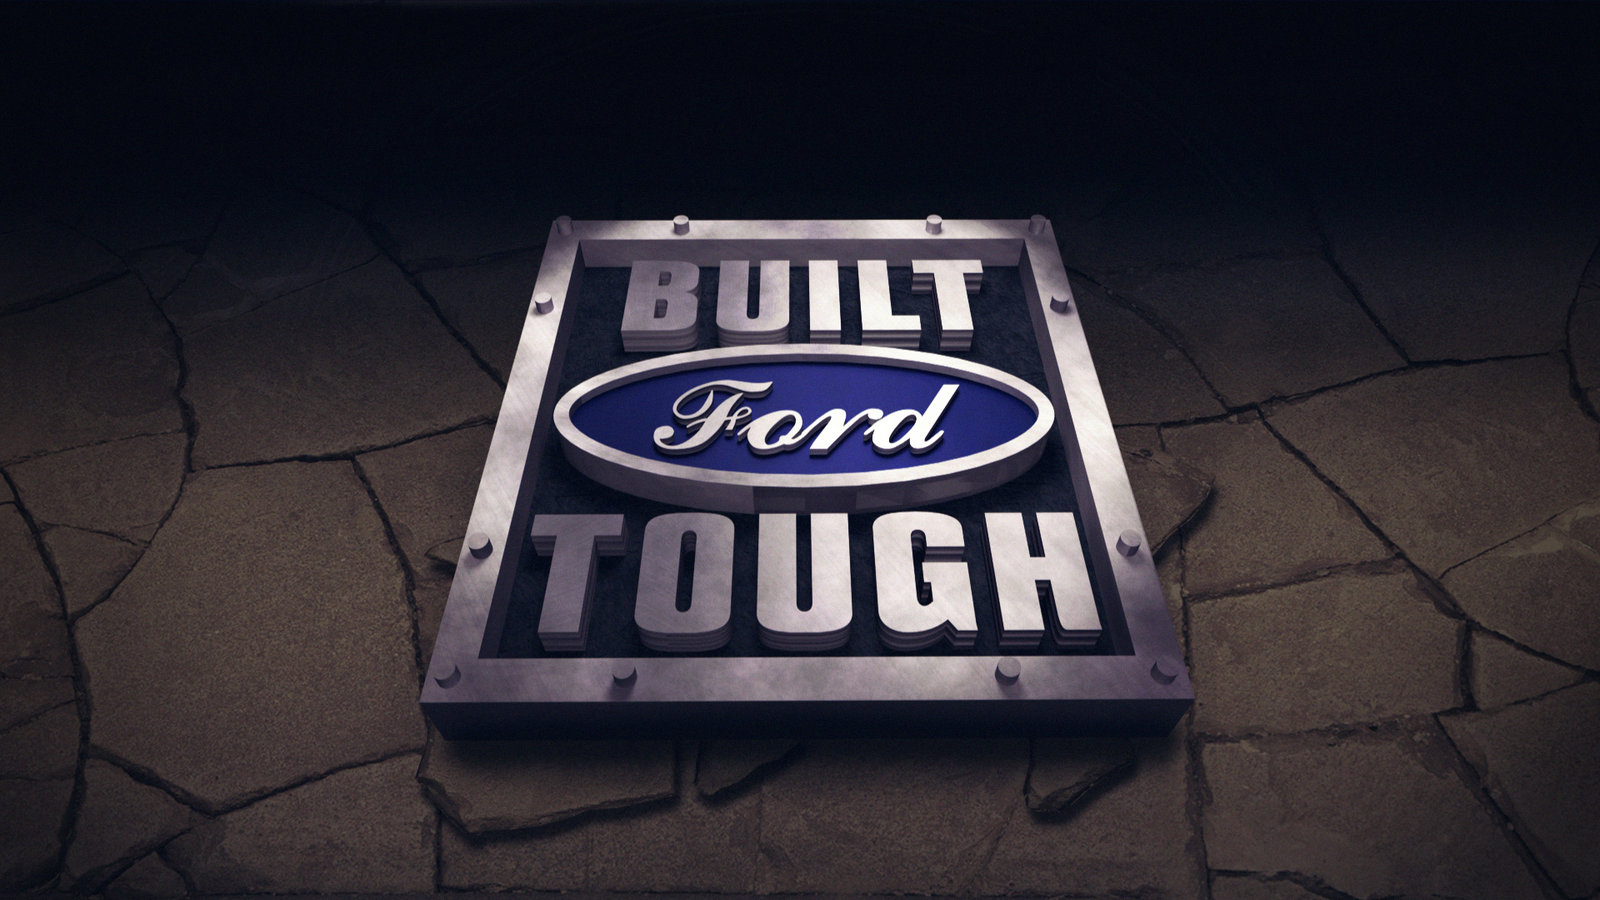 Built Ford Tough Photoshop Cs6 By Warrencarr